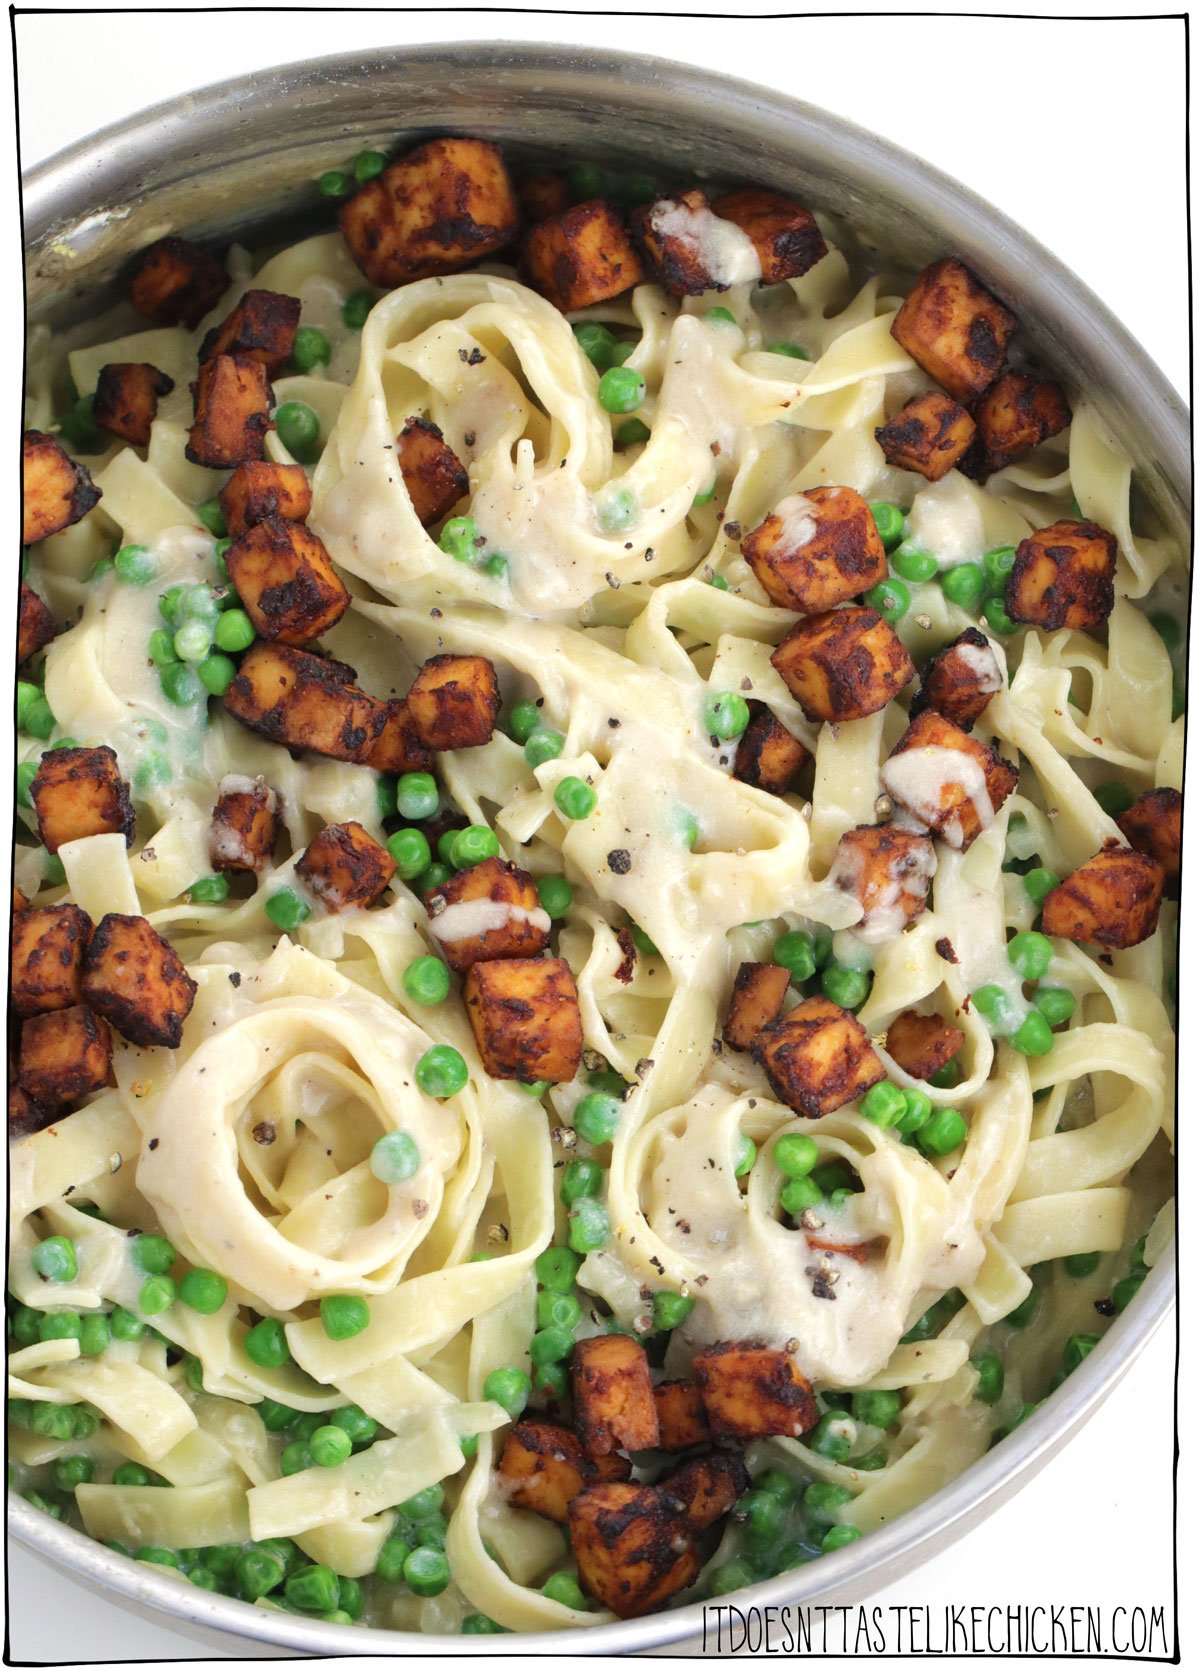 Vegan Creamy Pancetta & Pea Pasta takes just 30 minutes to make and is super creamy with pops of sweet peas, and topped with smoky vegan pancetta which is made from tofu! This recipe is easy to make and is bursting with flavor!